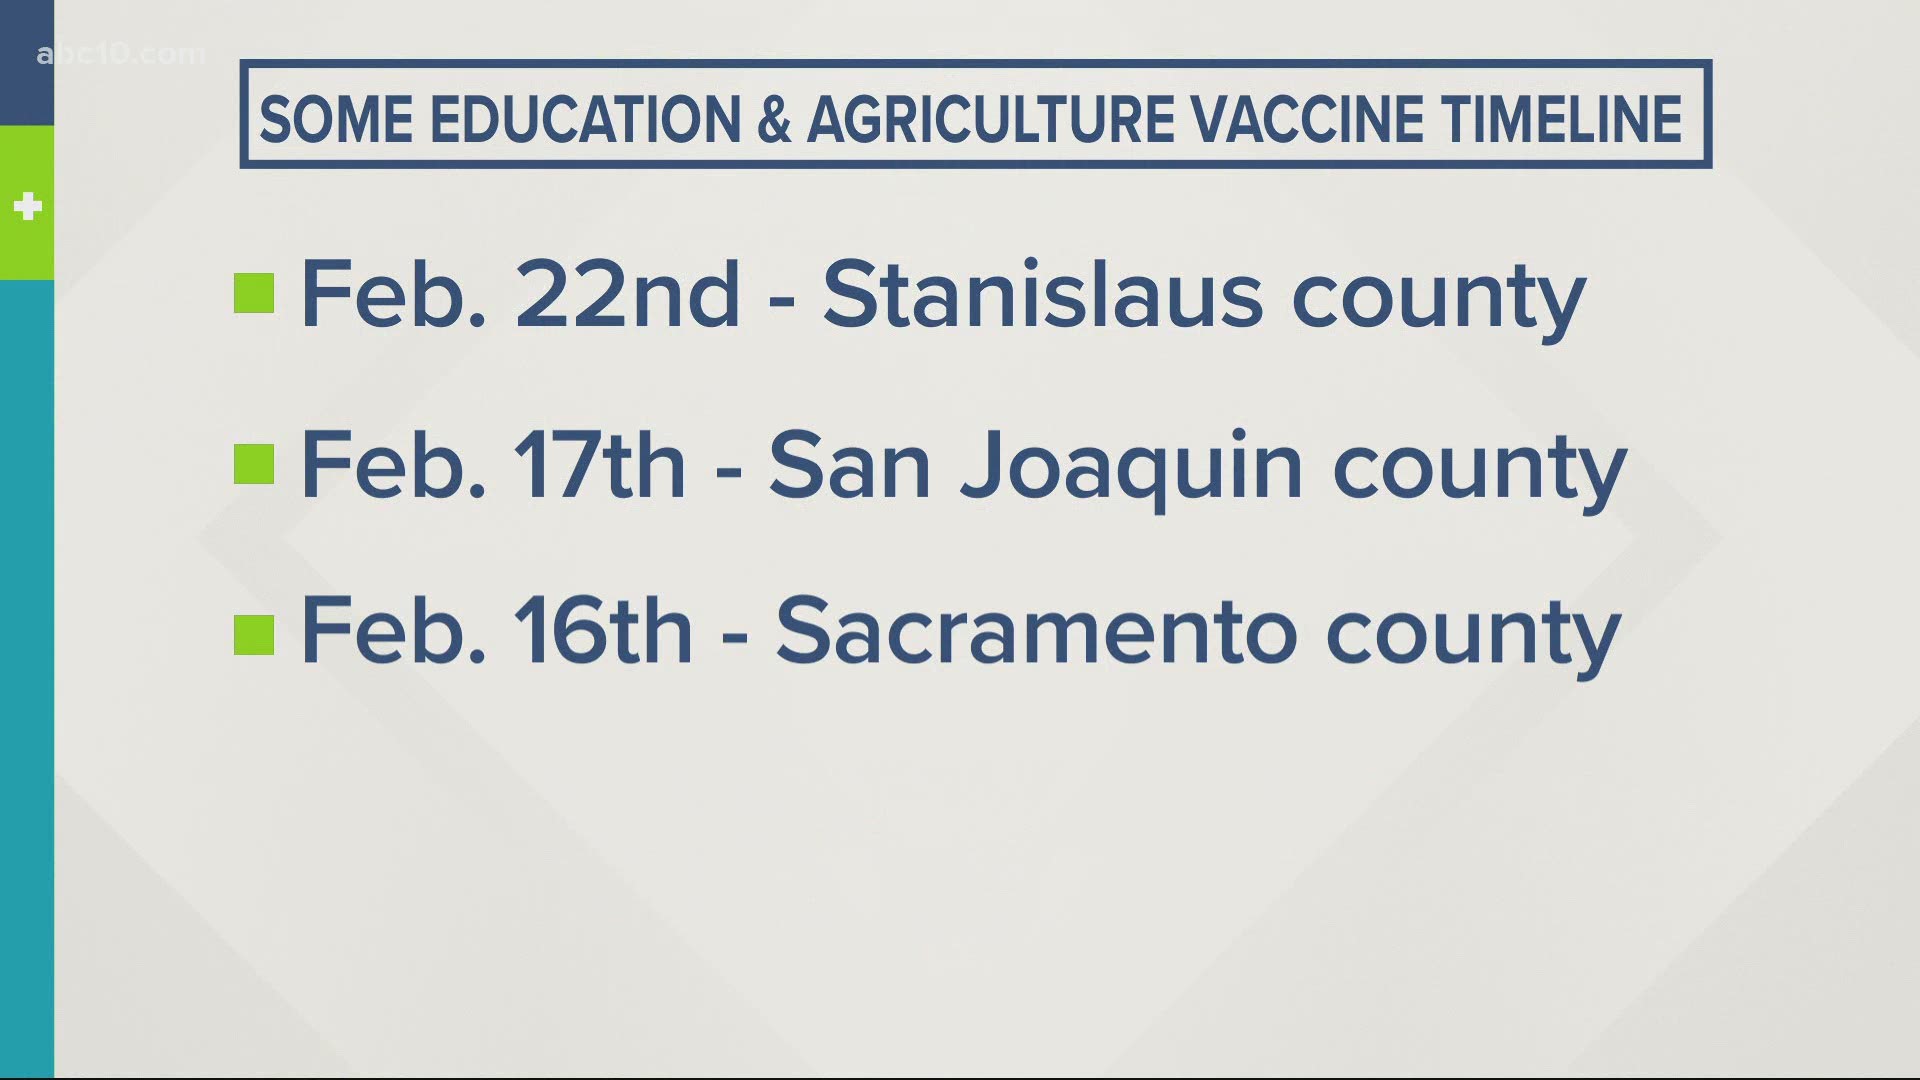 Stanislaus County, San Joaquin County, and Sacramento County have plans in place for vaccinating their educators this month.